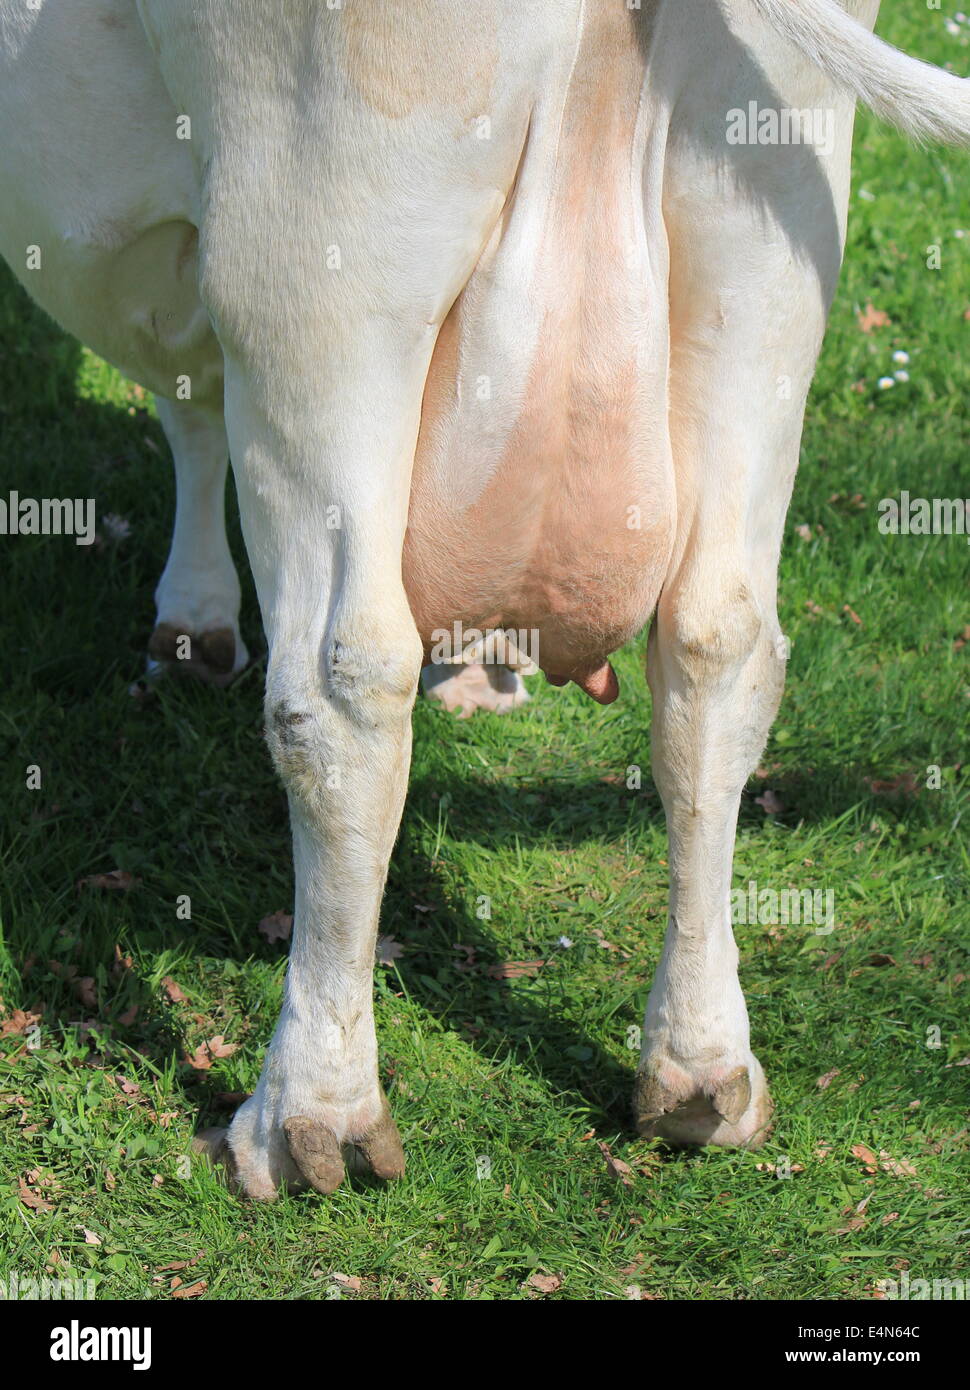 Udders of a cow Stock Photo